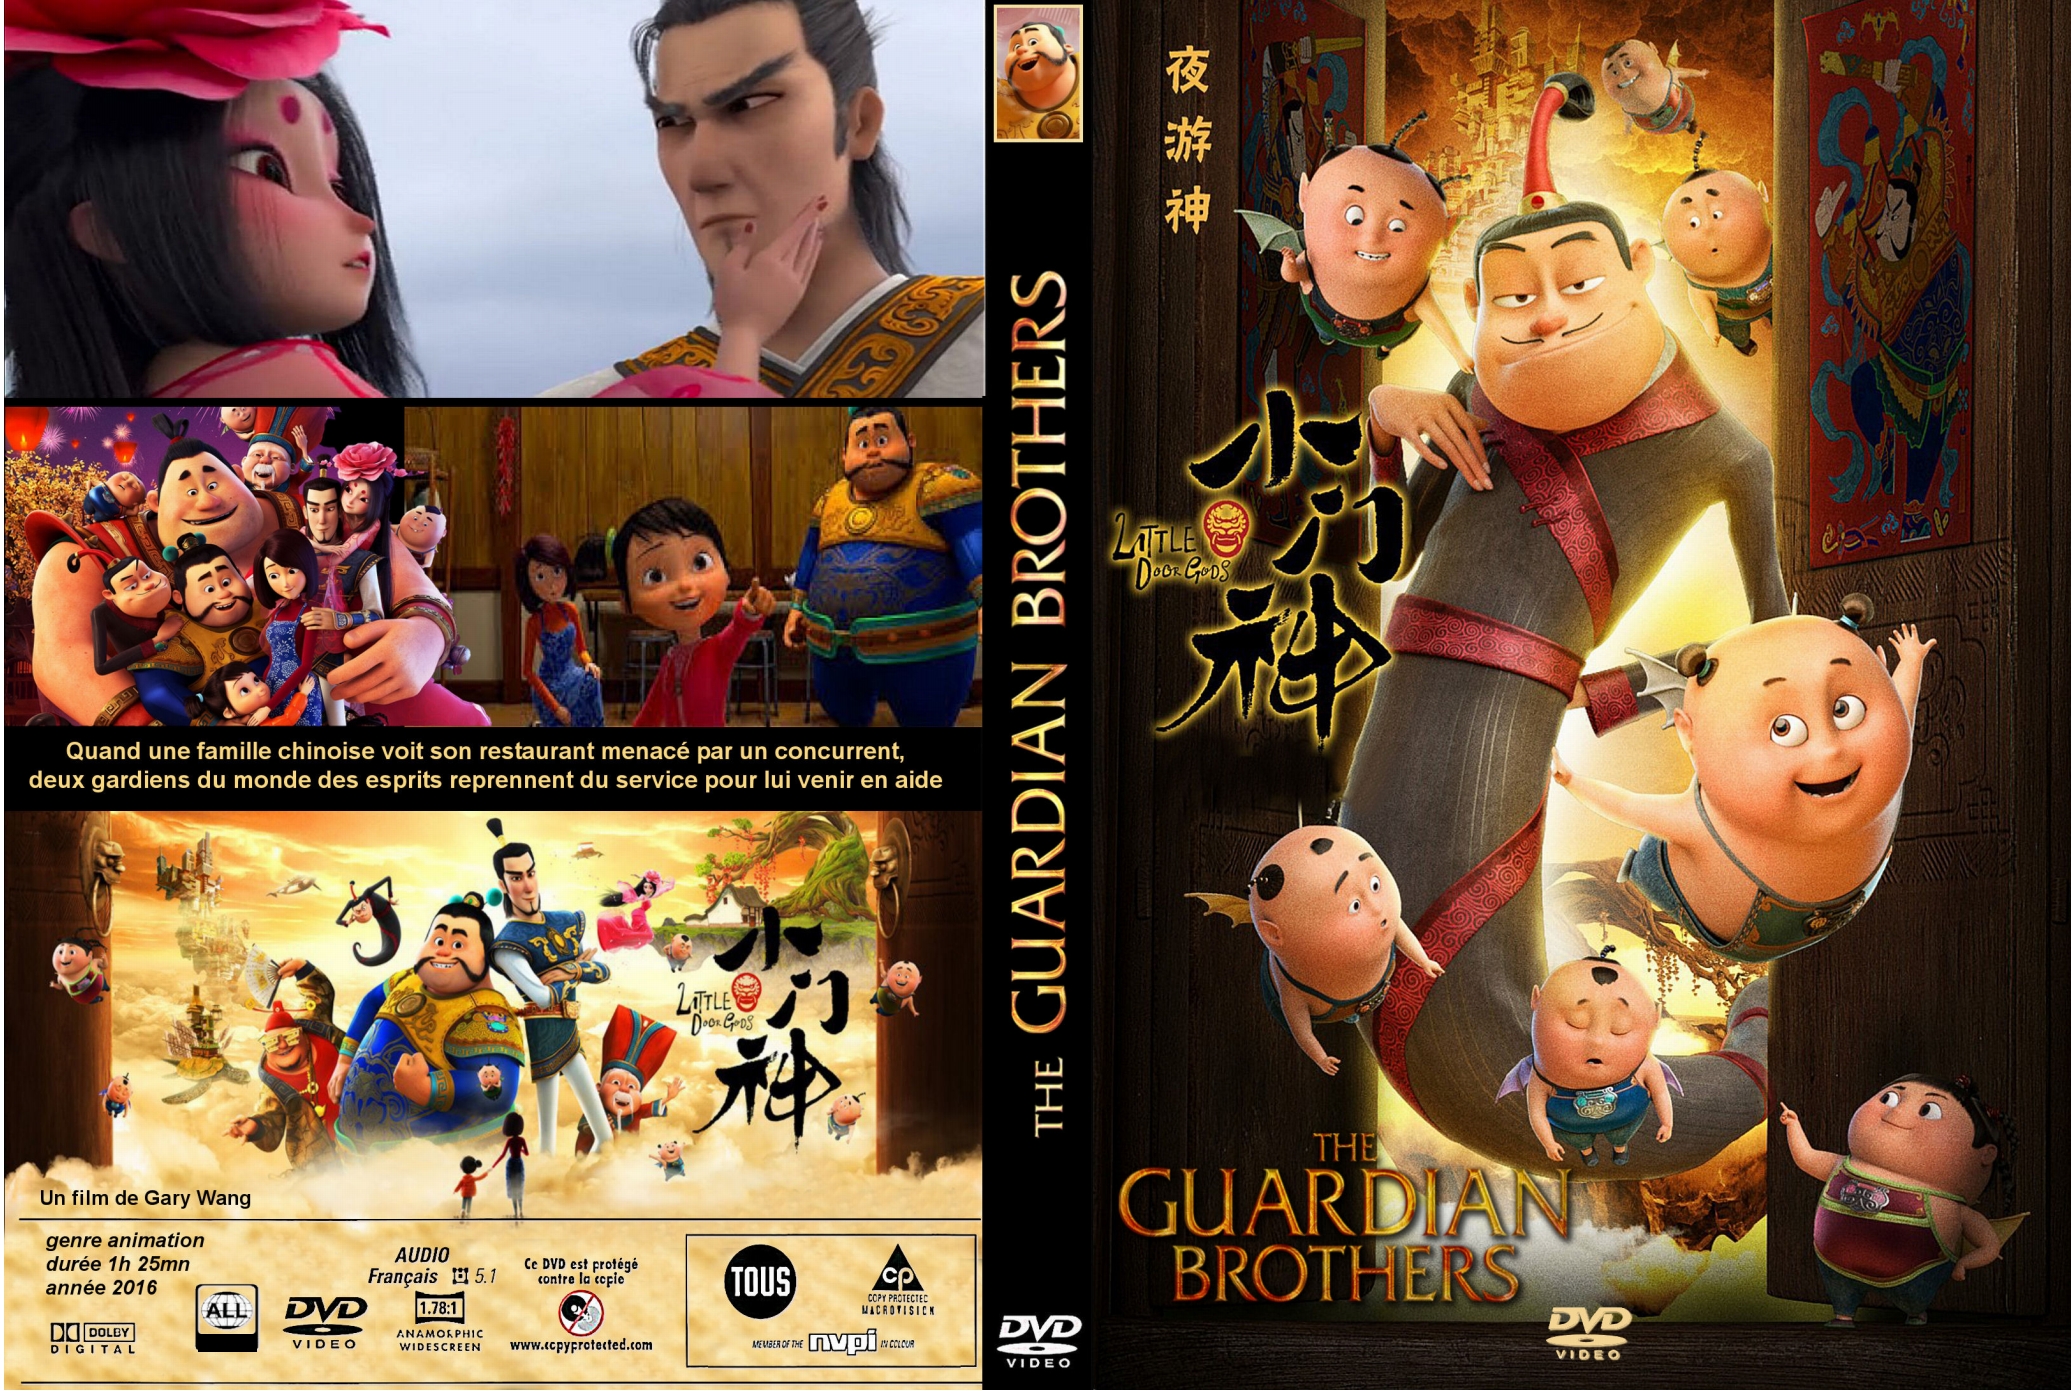 Jaquette DVD The guardian brothers custom